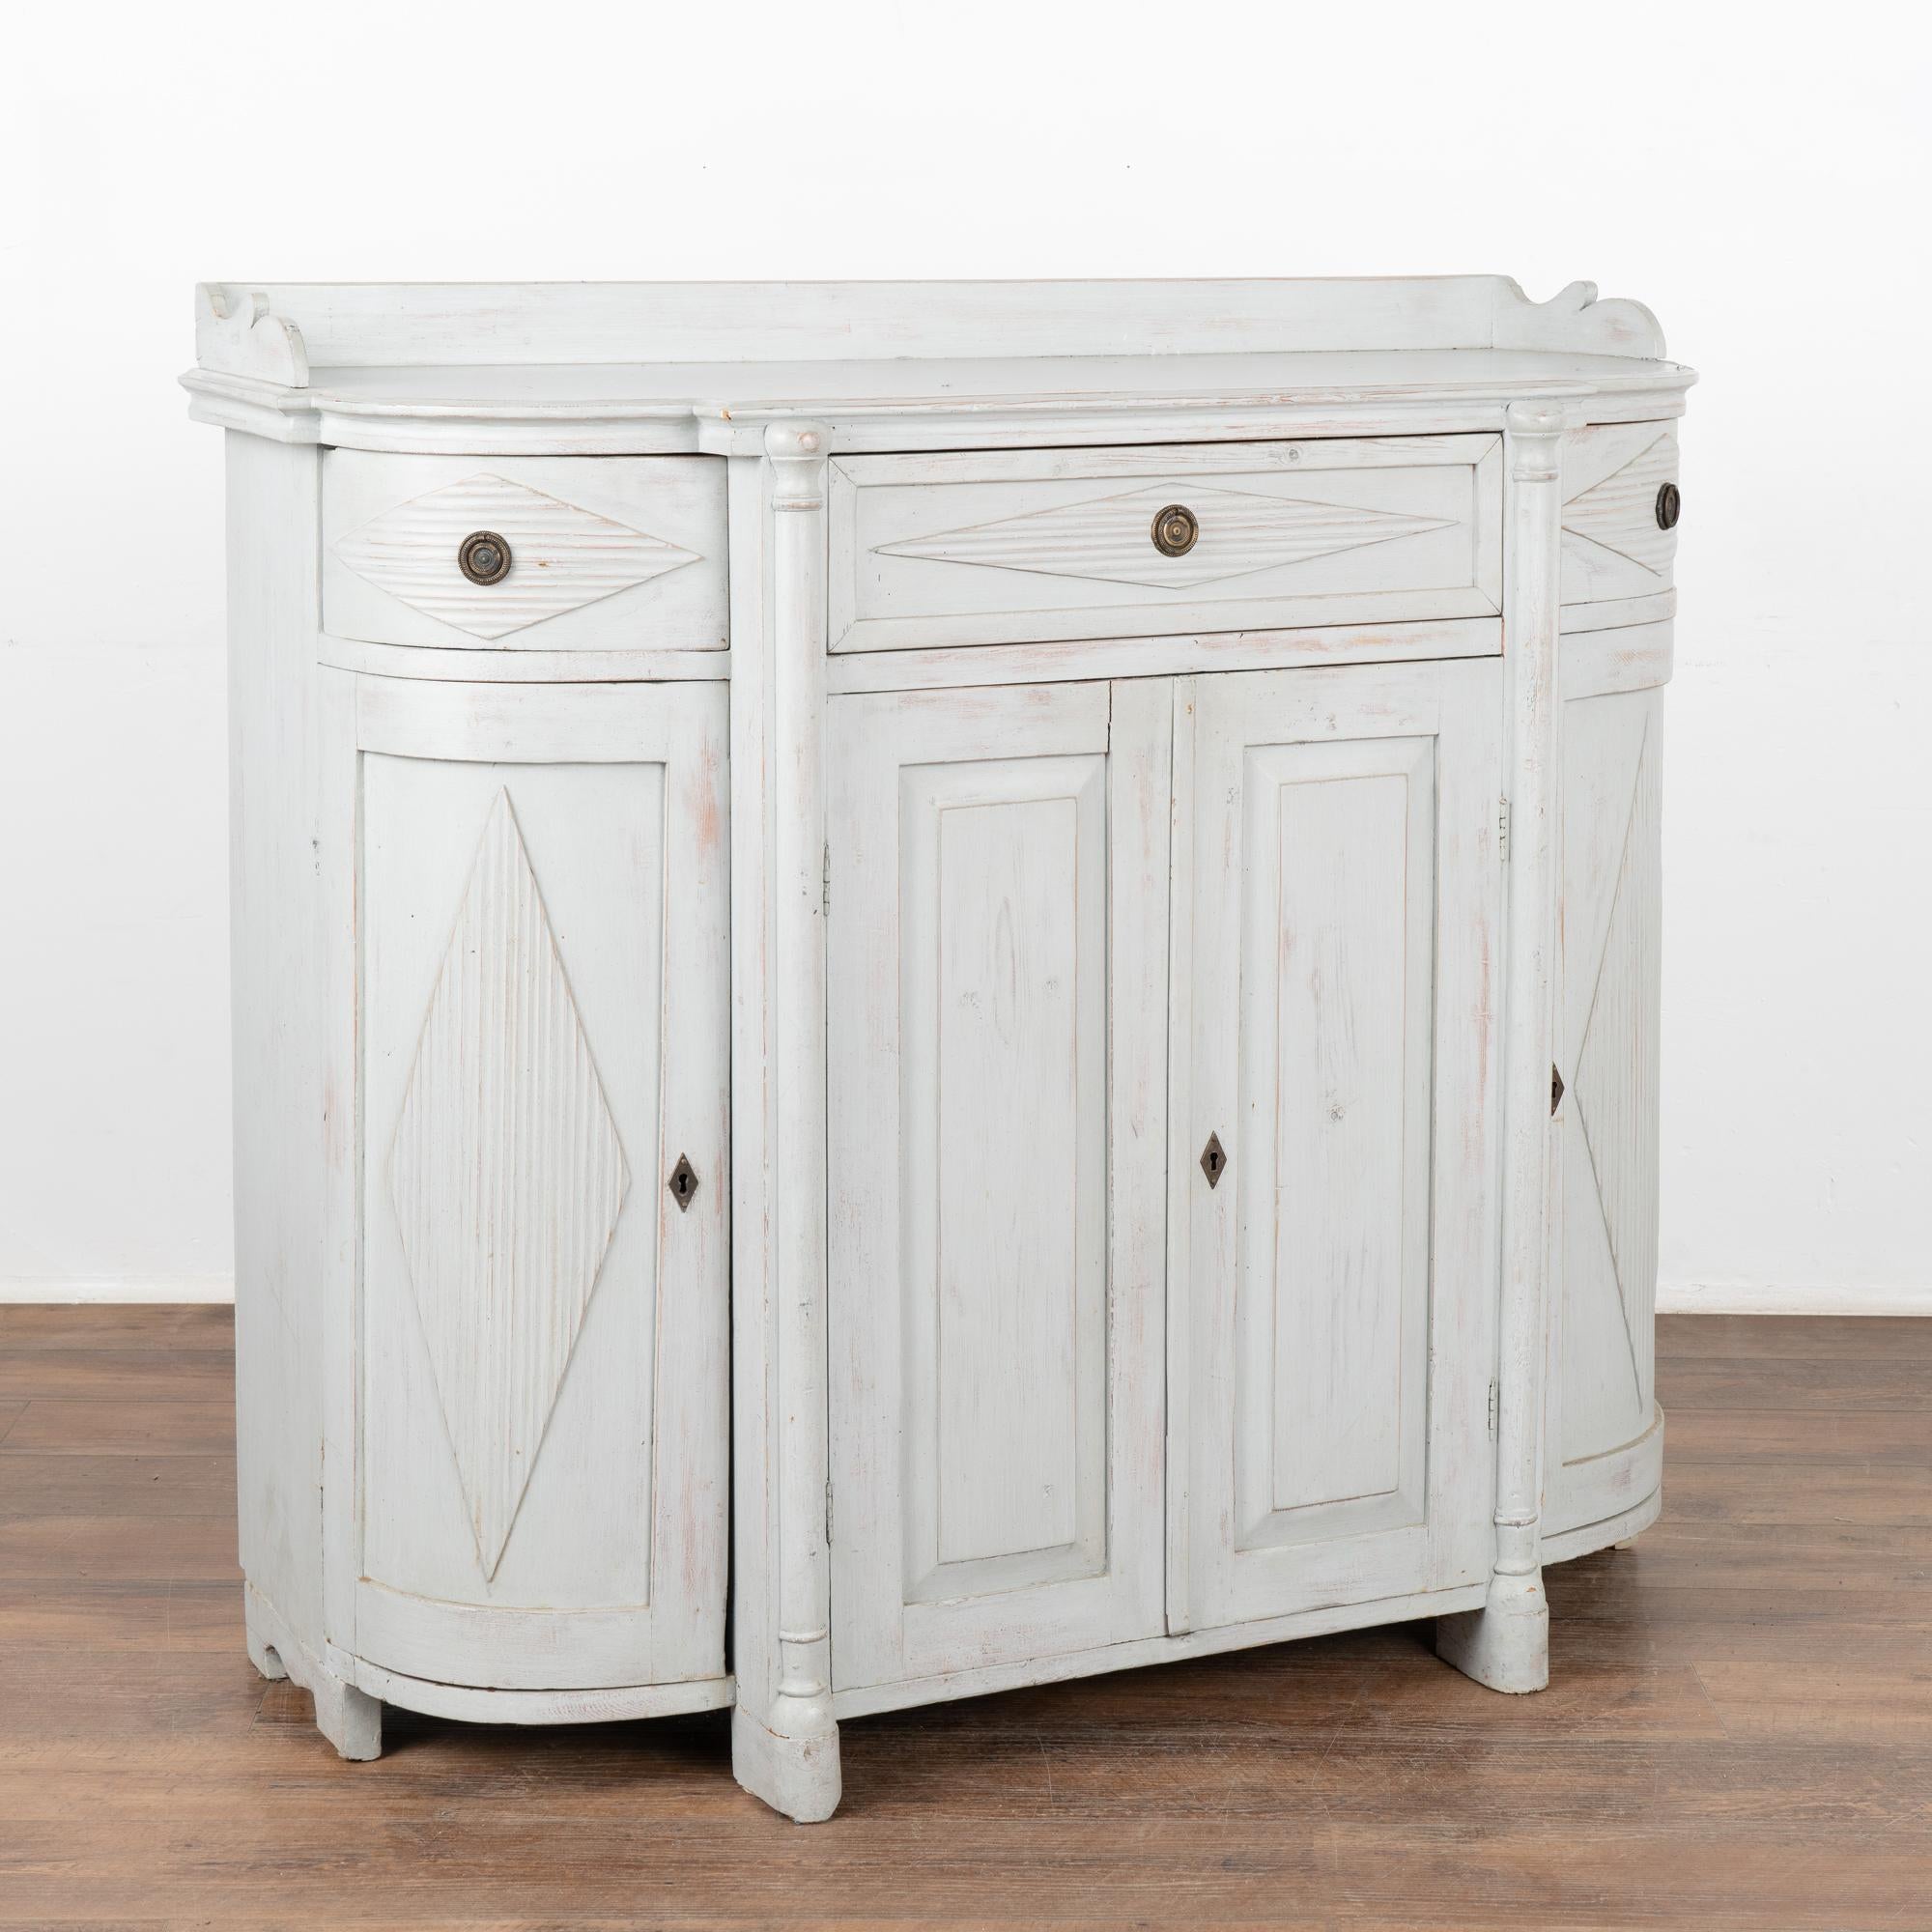 Tall Swedish Gustavian gray painted pine sideboard with attractive curved sides and traditional fluted diamond details.
The curved long cabinet doors and drawers make this cabinet a special find.
The later applied gray painted finish is lightly